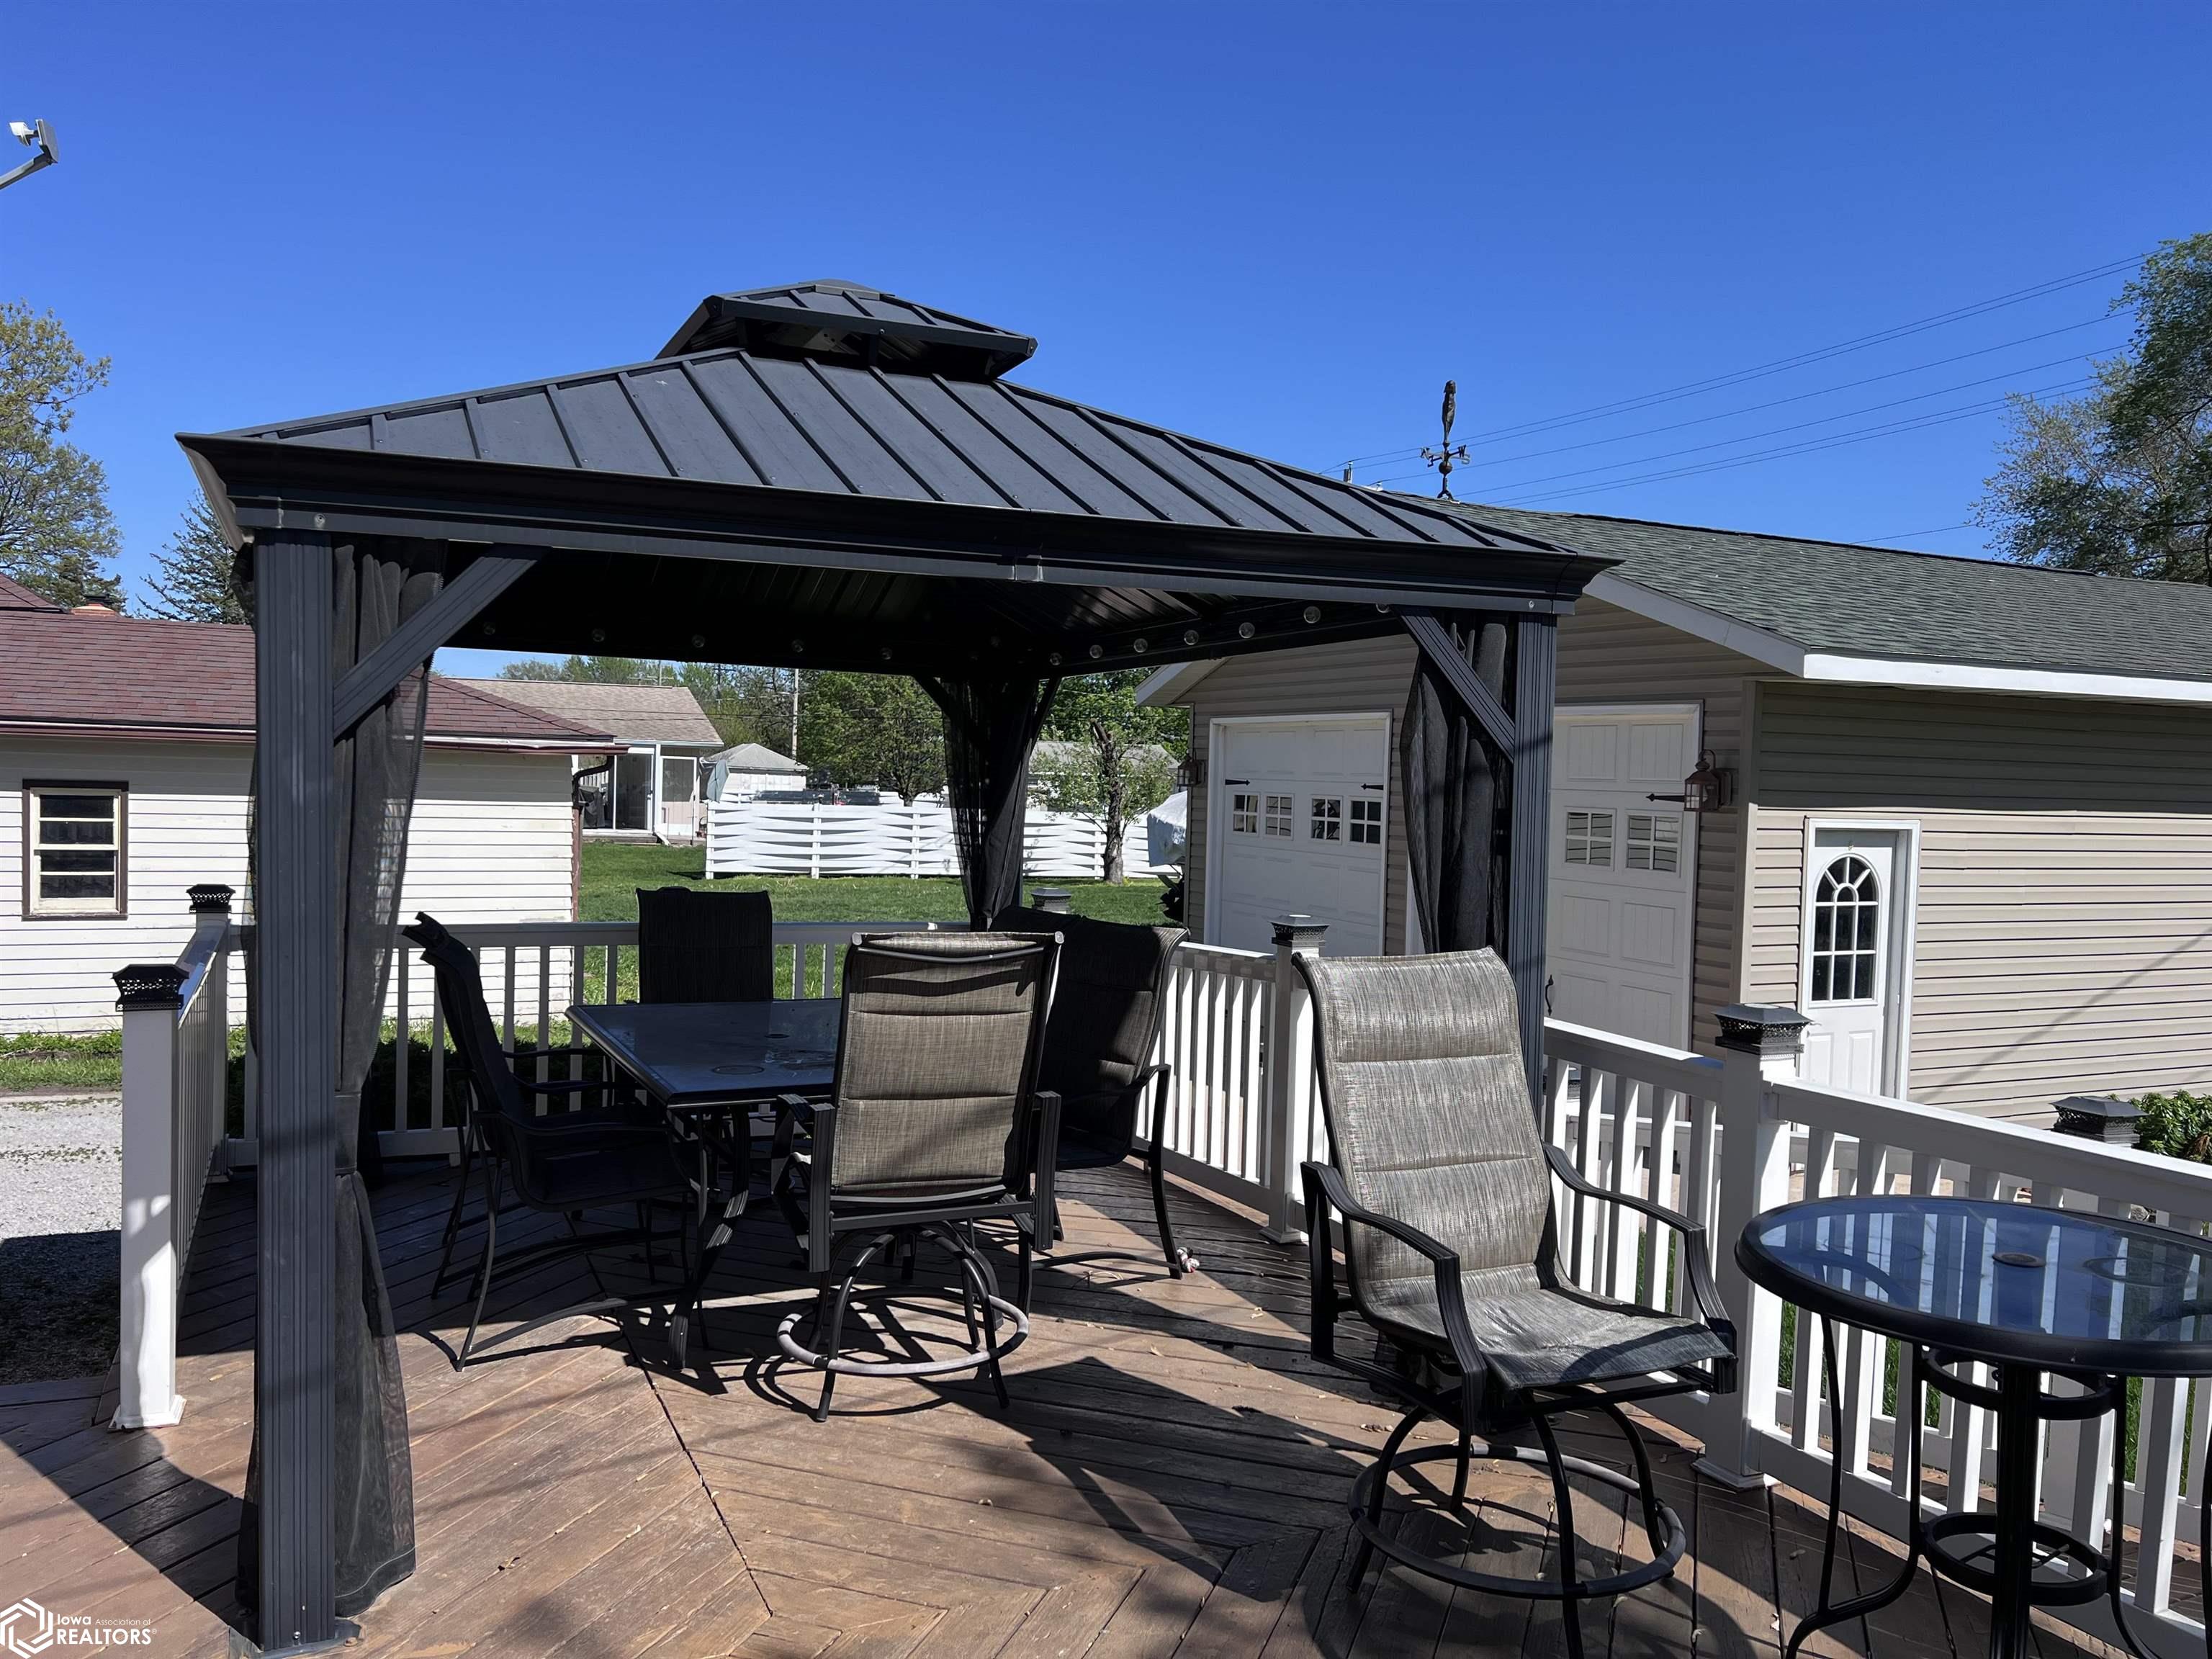 Gazebo included along with the table and chairs underneath